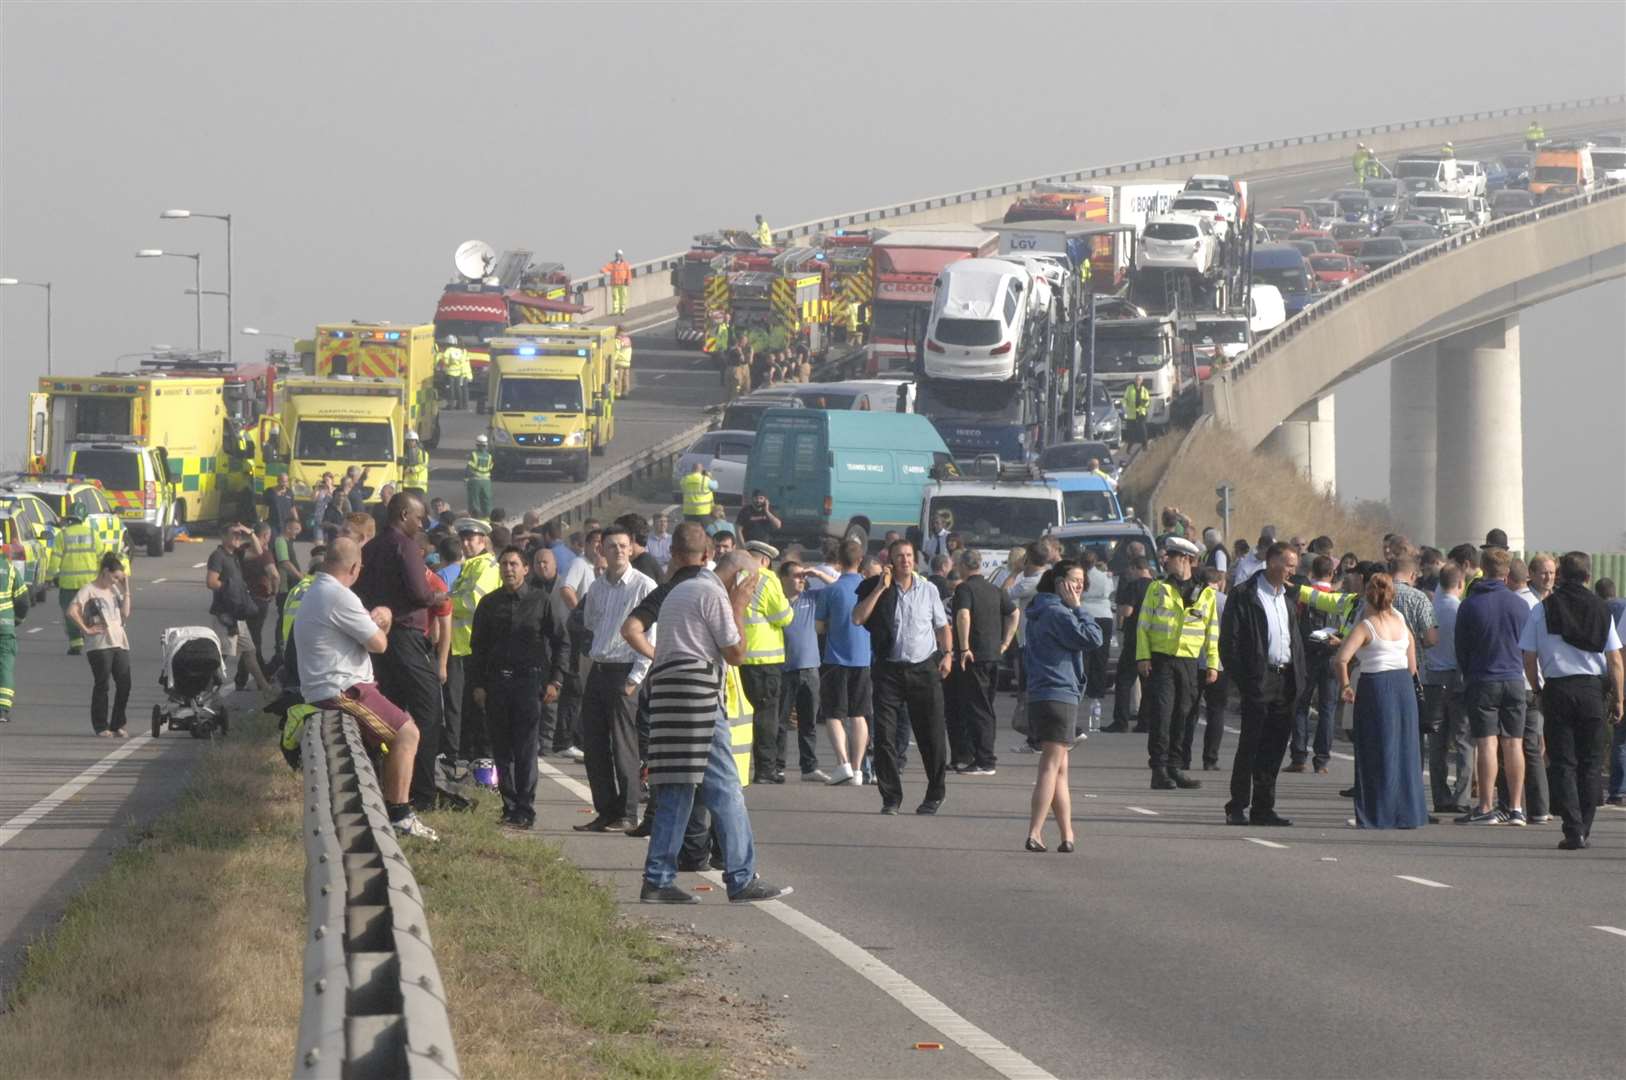 The scene at the Sheppey Crossing following the huge pile up in 2013